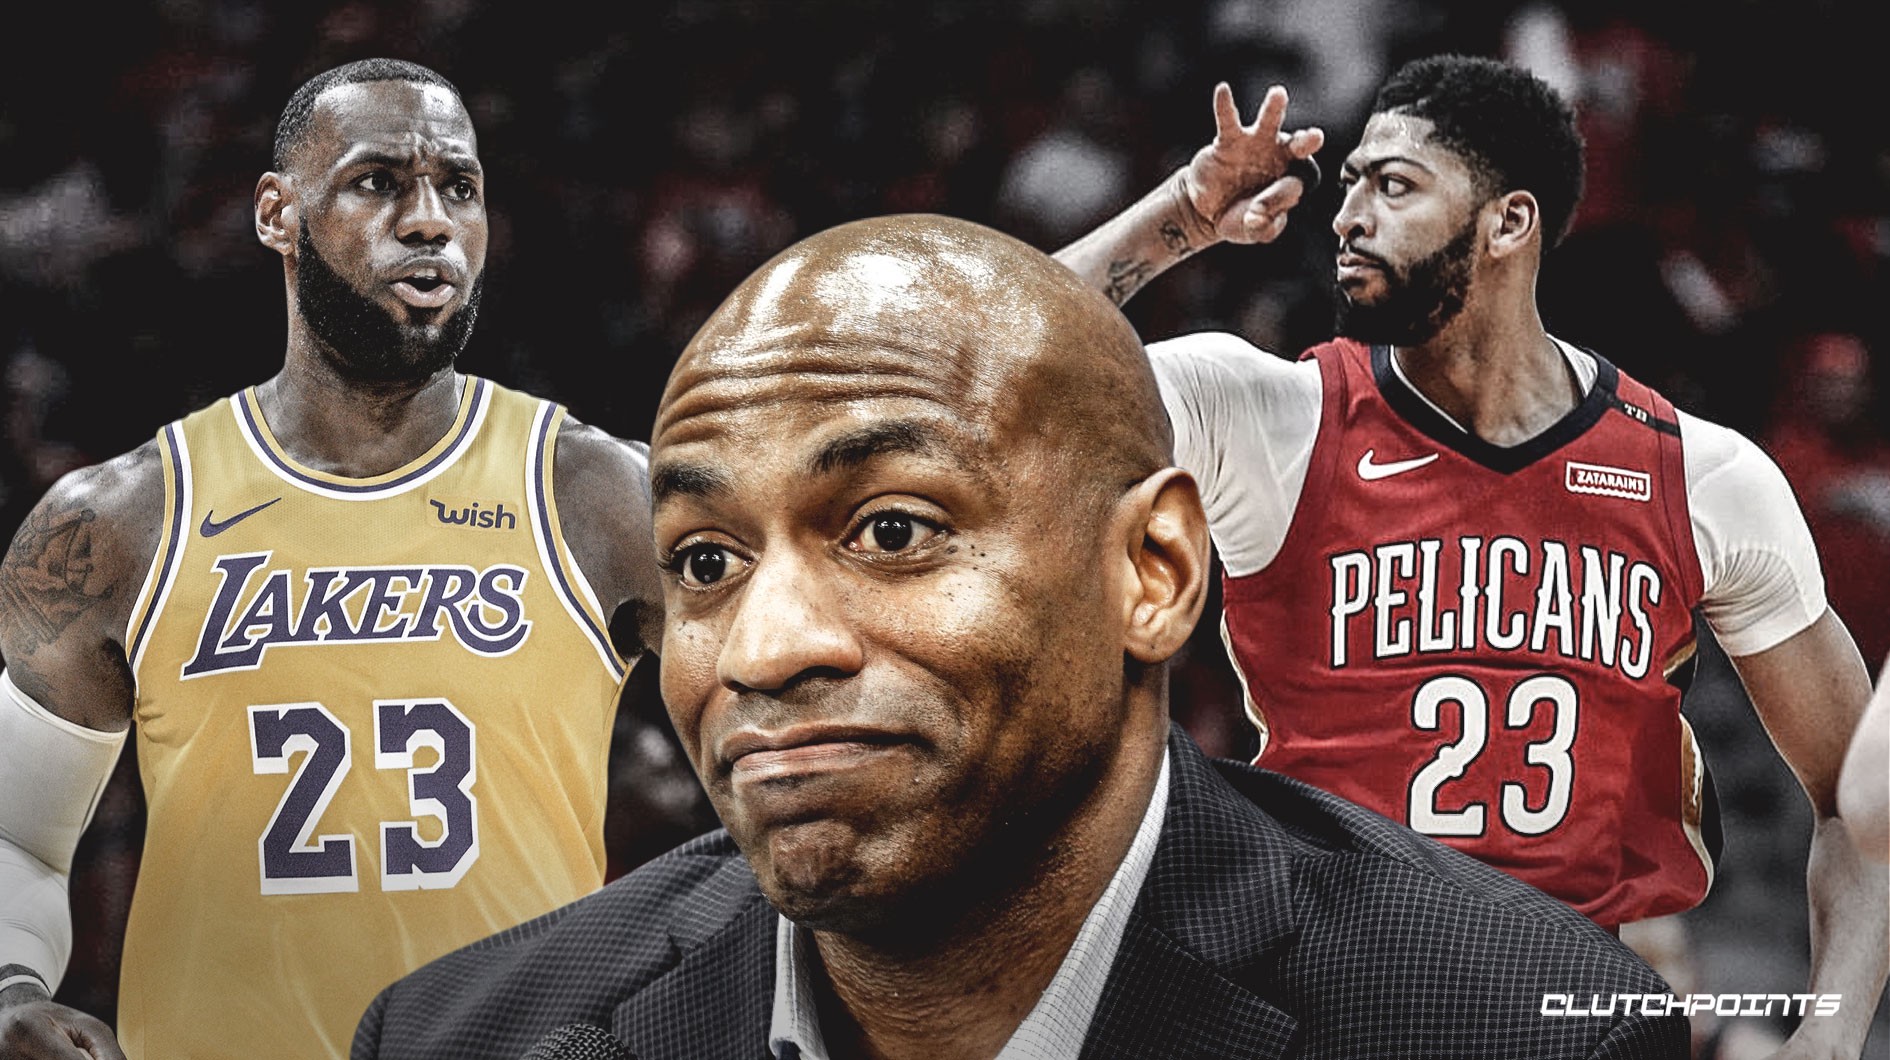 NBA Talk #51: Why did the Pelicans Fired Dell Demps? — dwin0603 on Scorum